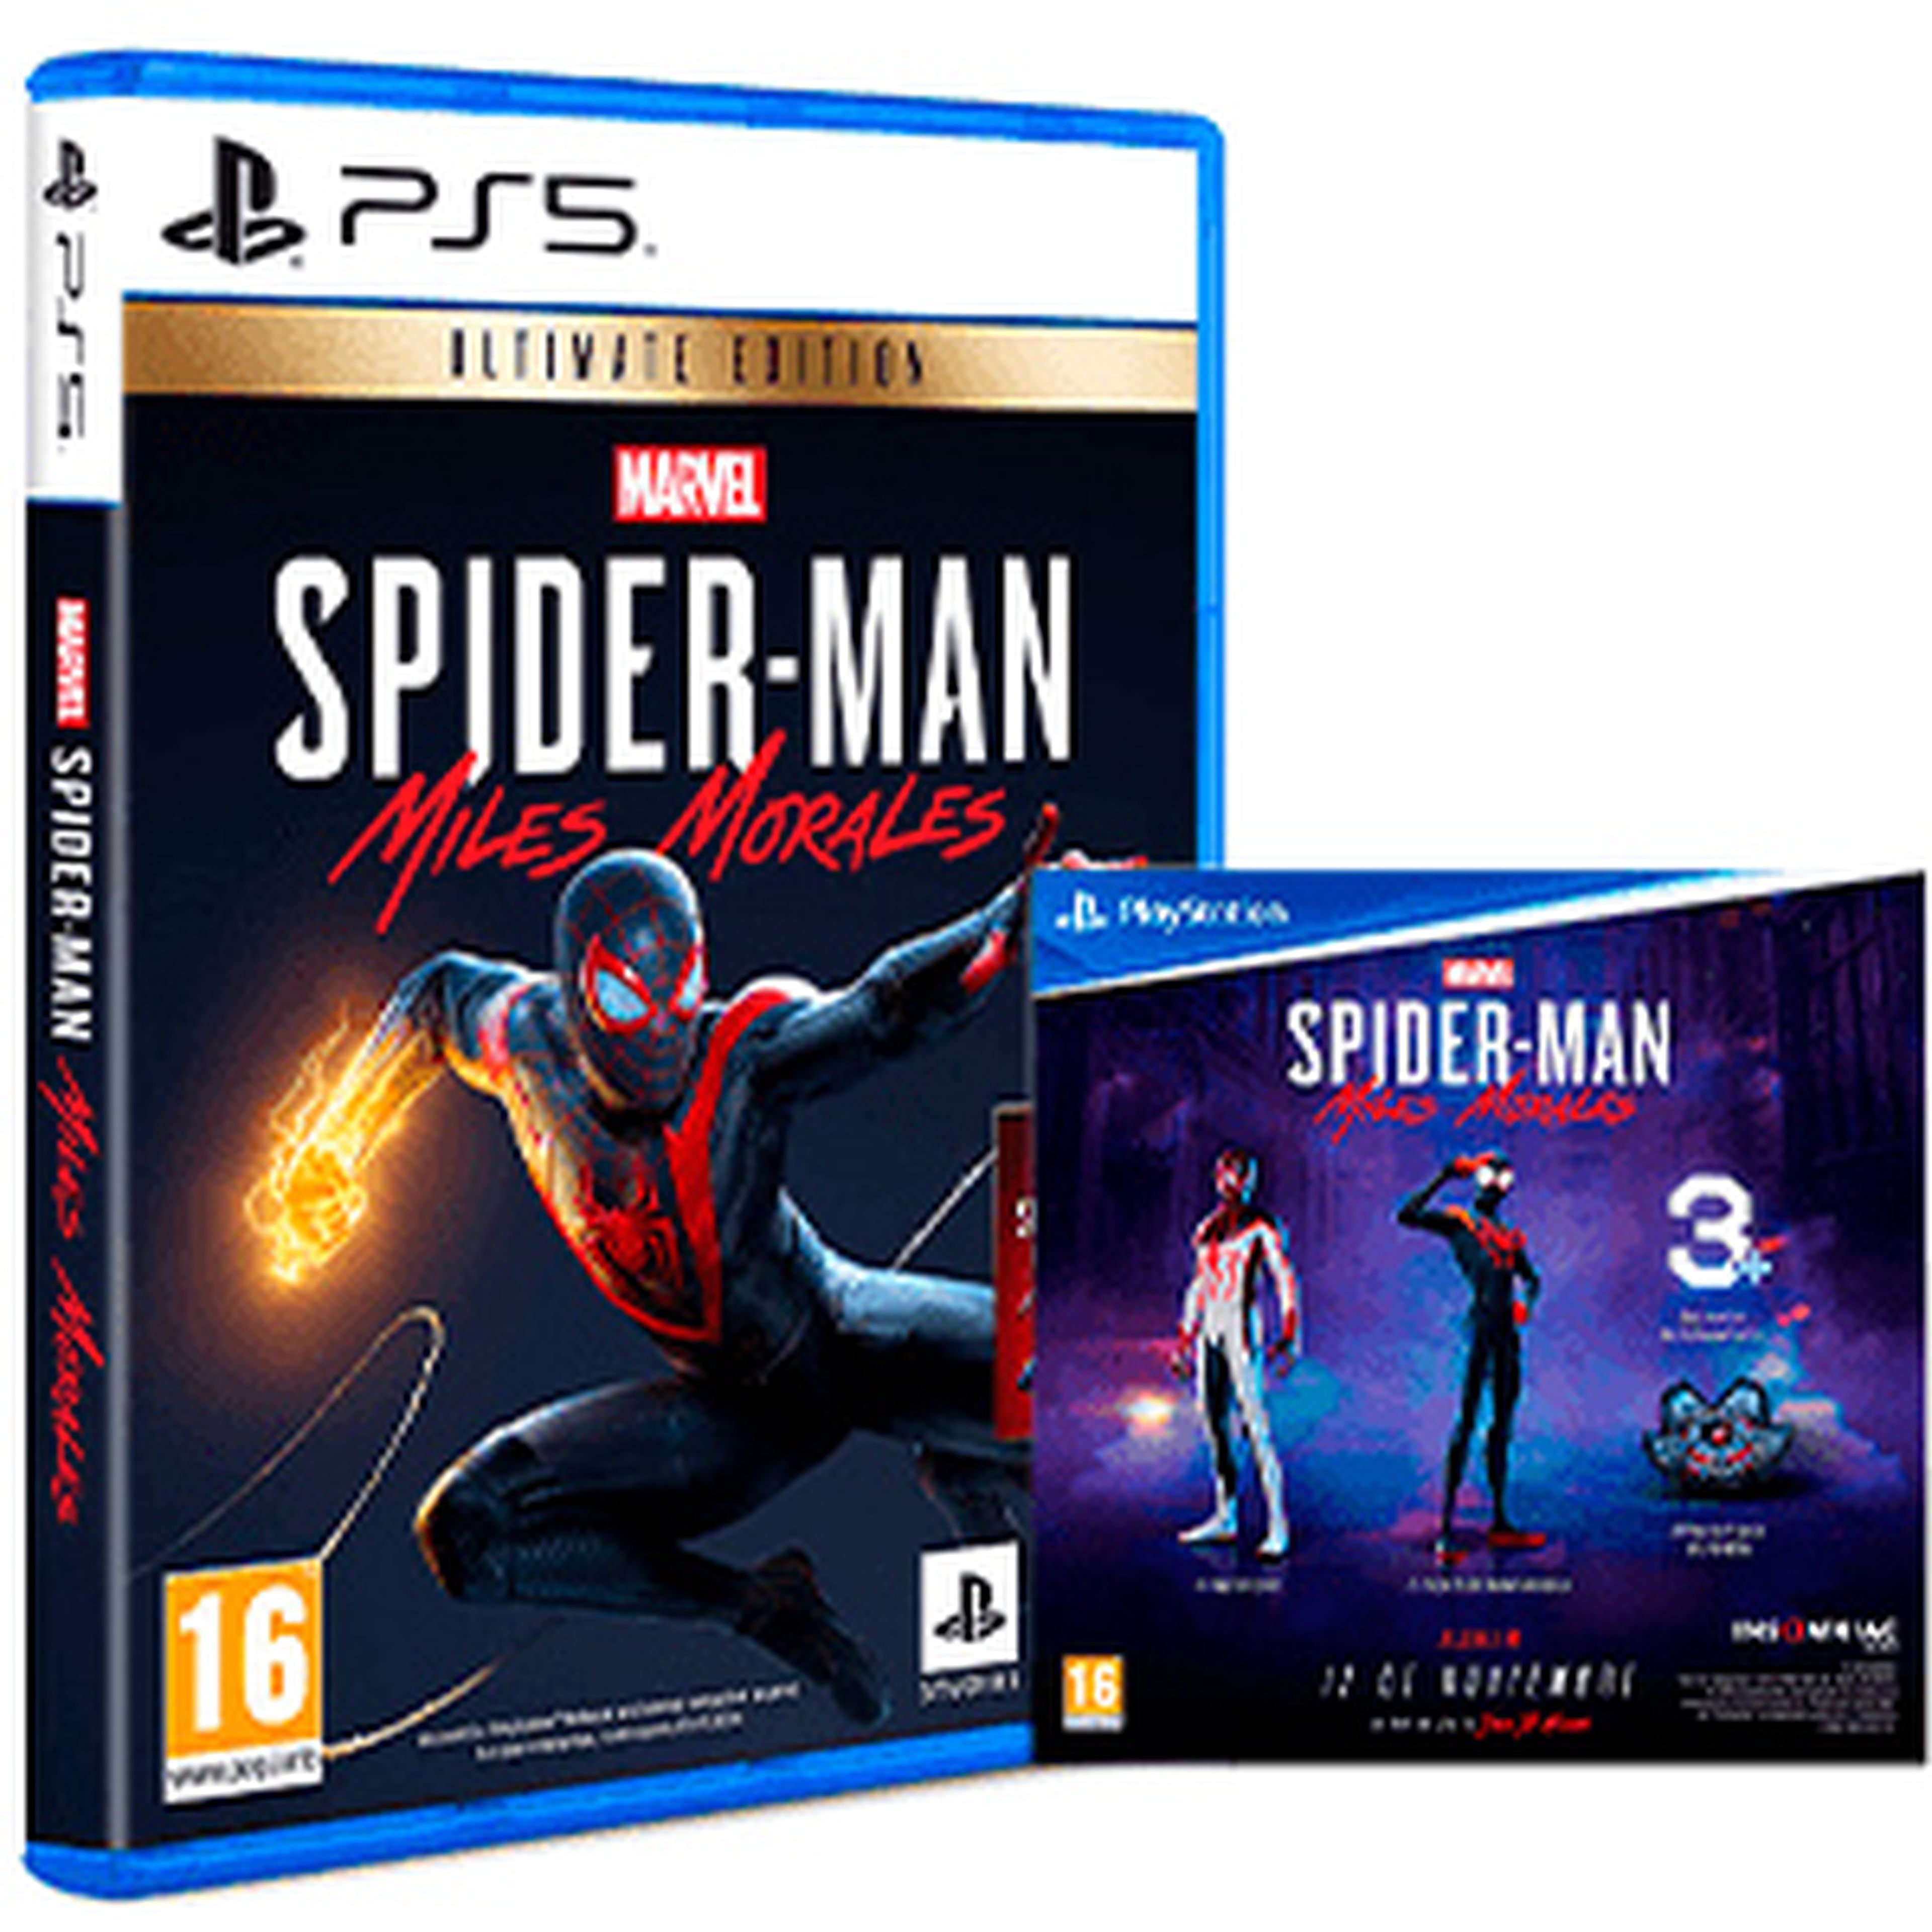 PROMO GAME PS5 HALLOWEEN miles morales ultimate